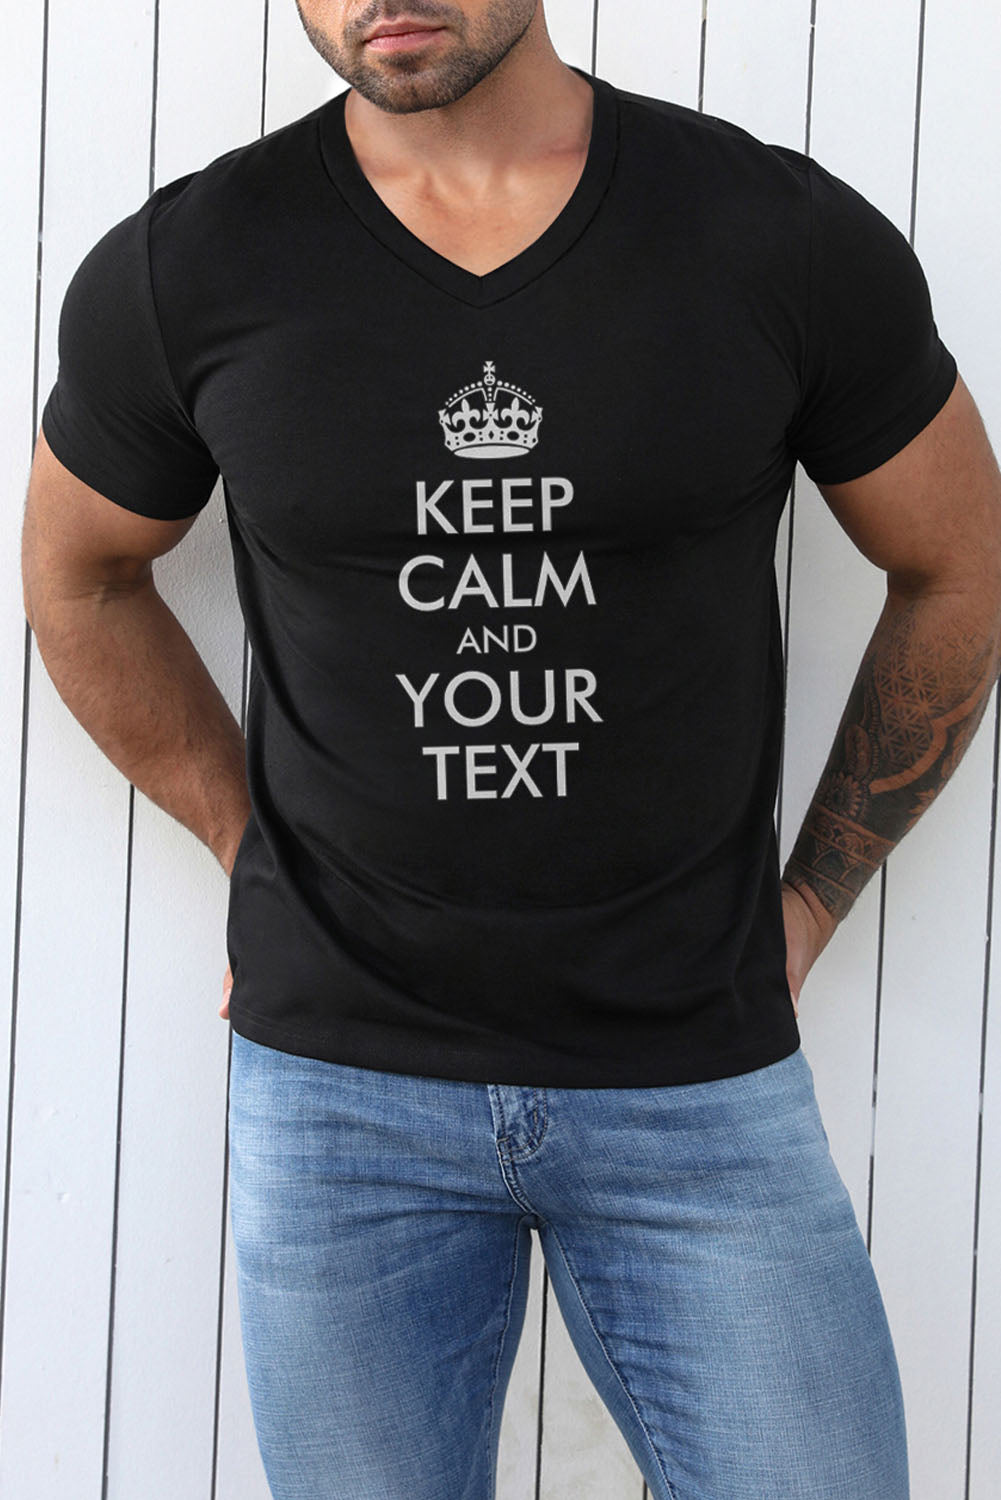 Black Keep Calm And Your Text Crown Printed Men's Graphic Tee Black 65%Polyester+30%Cotton+5%Elastane Men's Tops JT's Designer Fashion